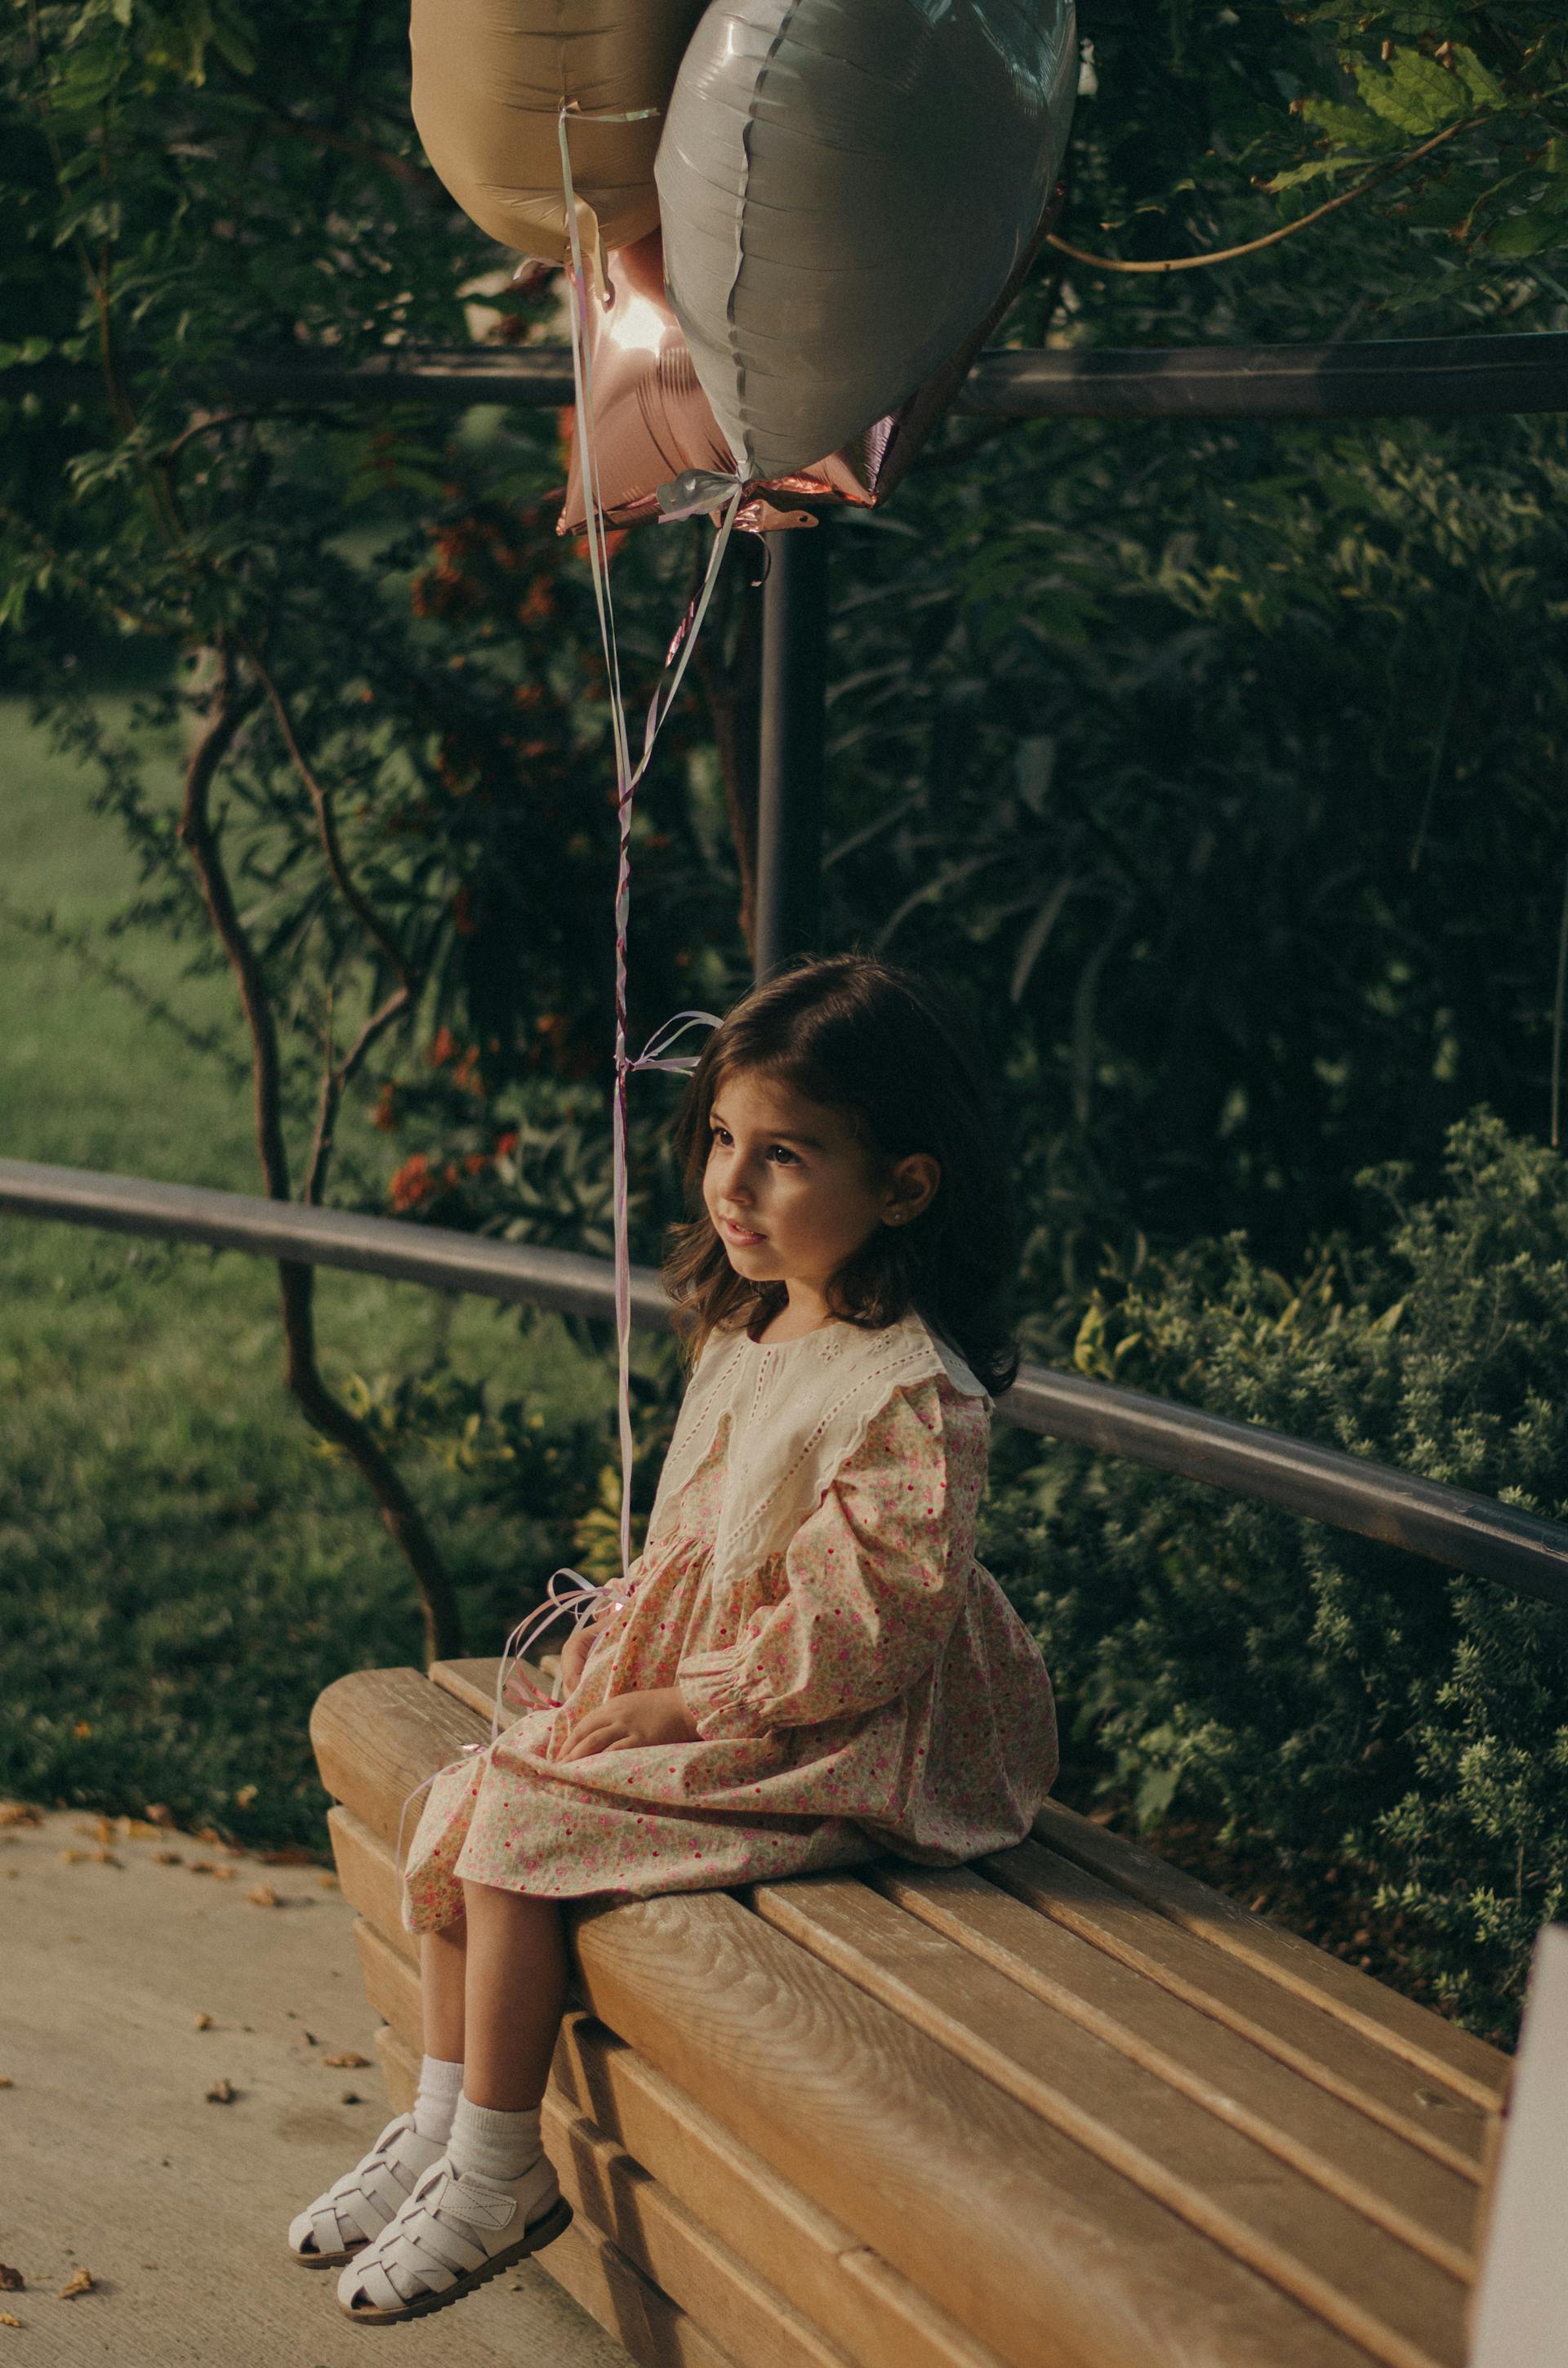 A little girl sitting on a park bench | Source: Pexels